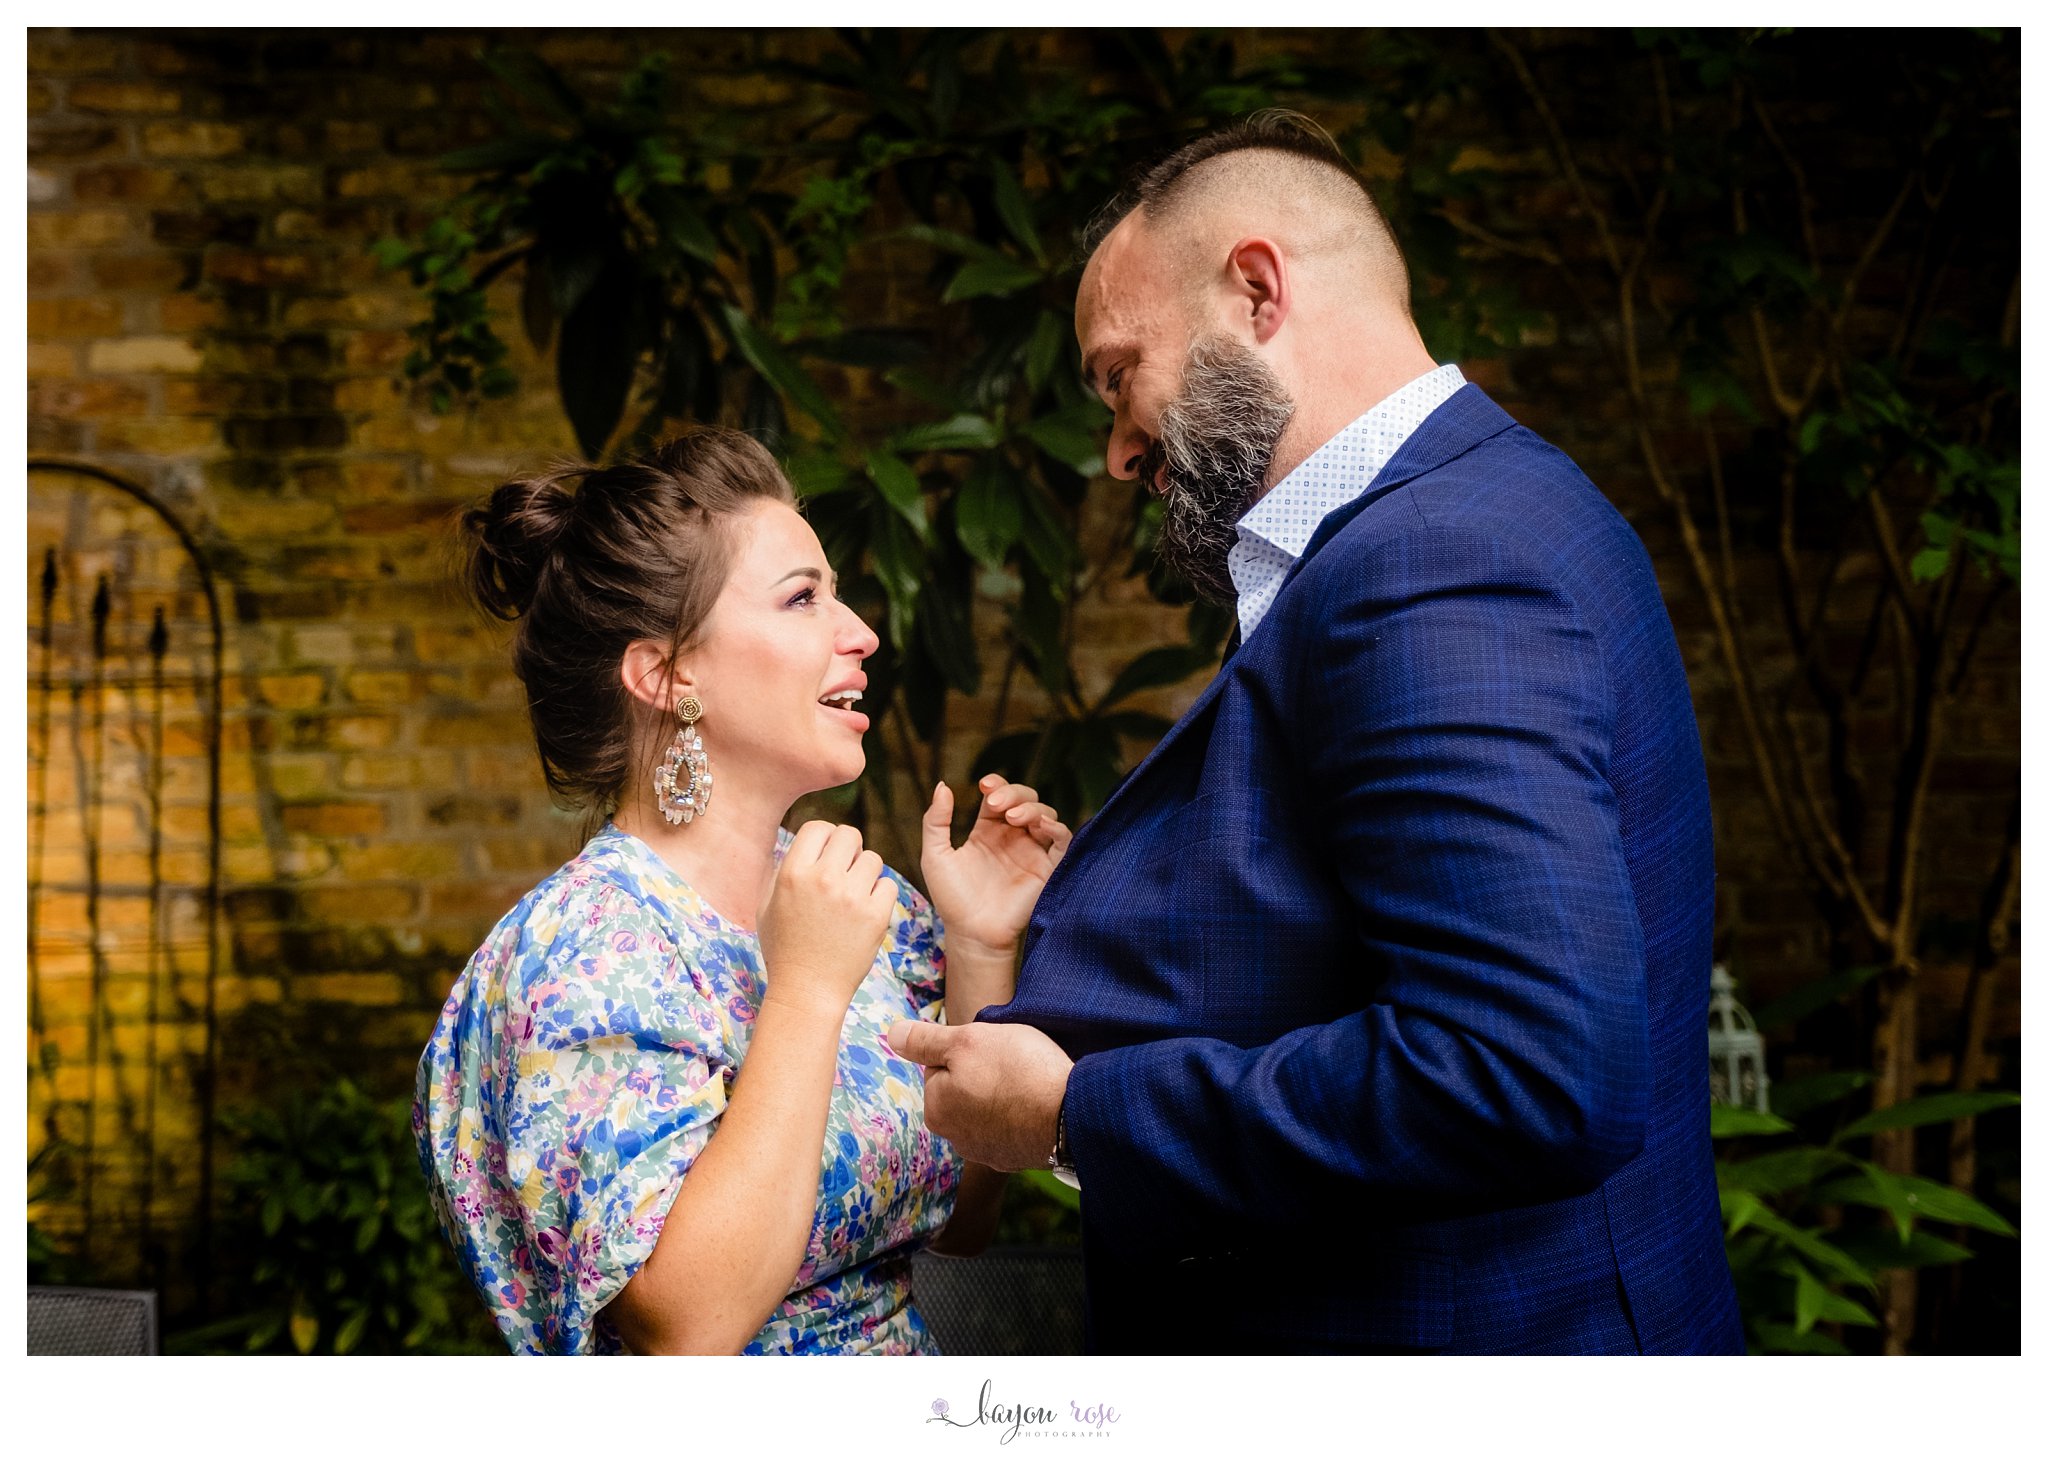 New Orleans proposal photography session